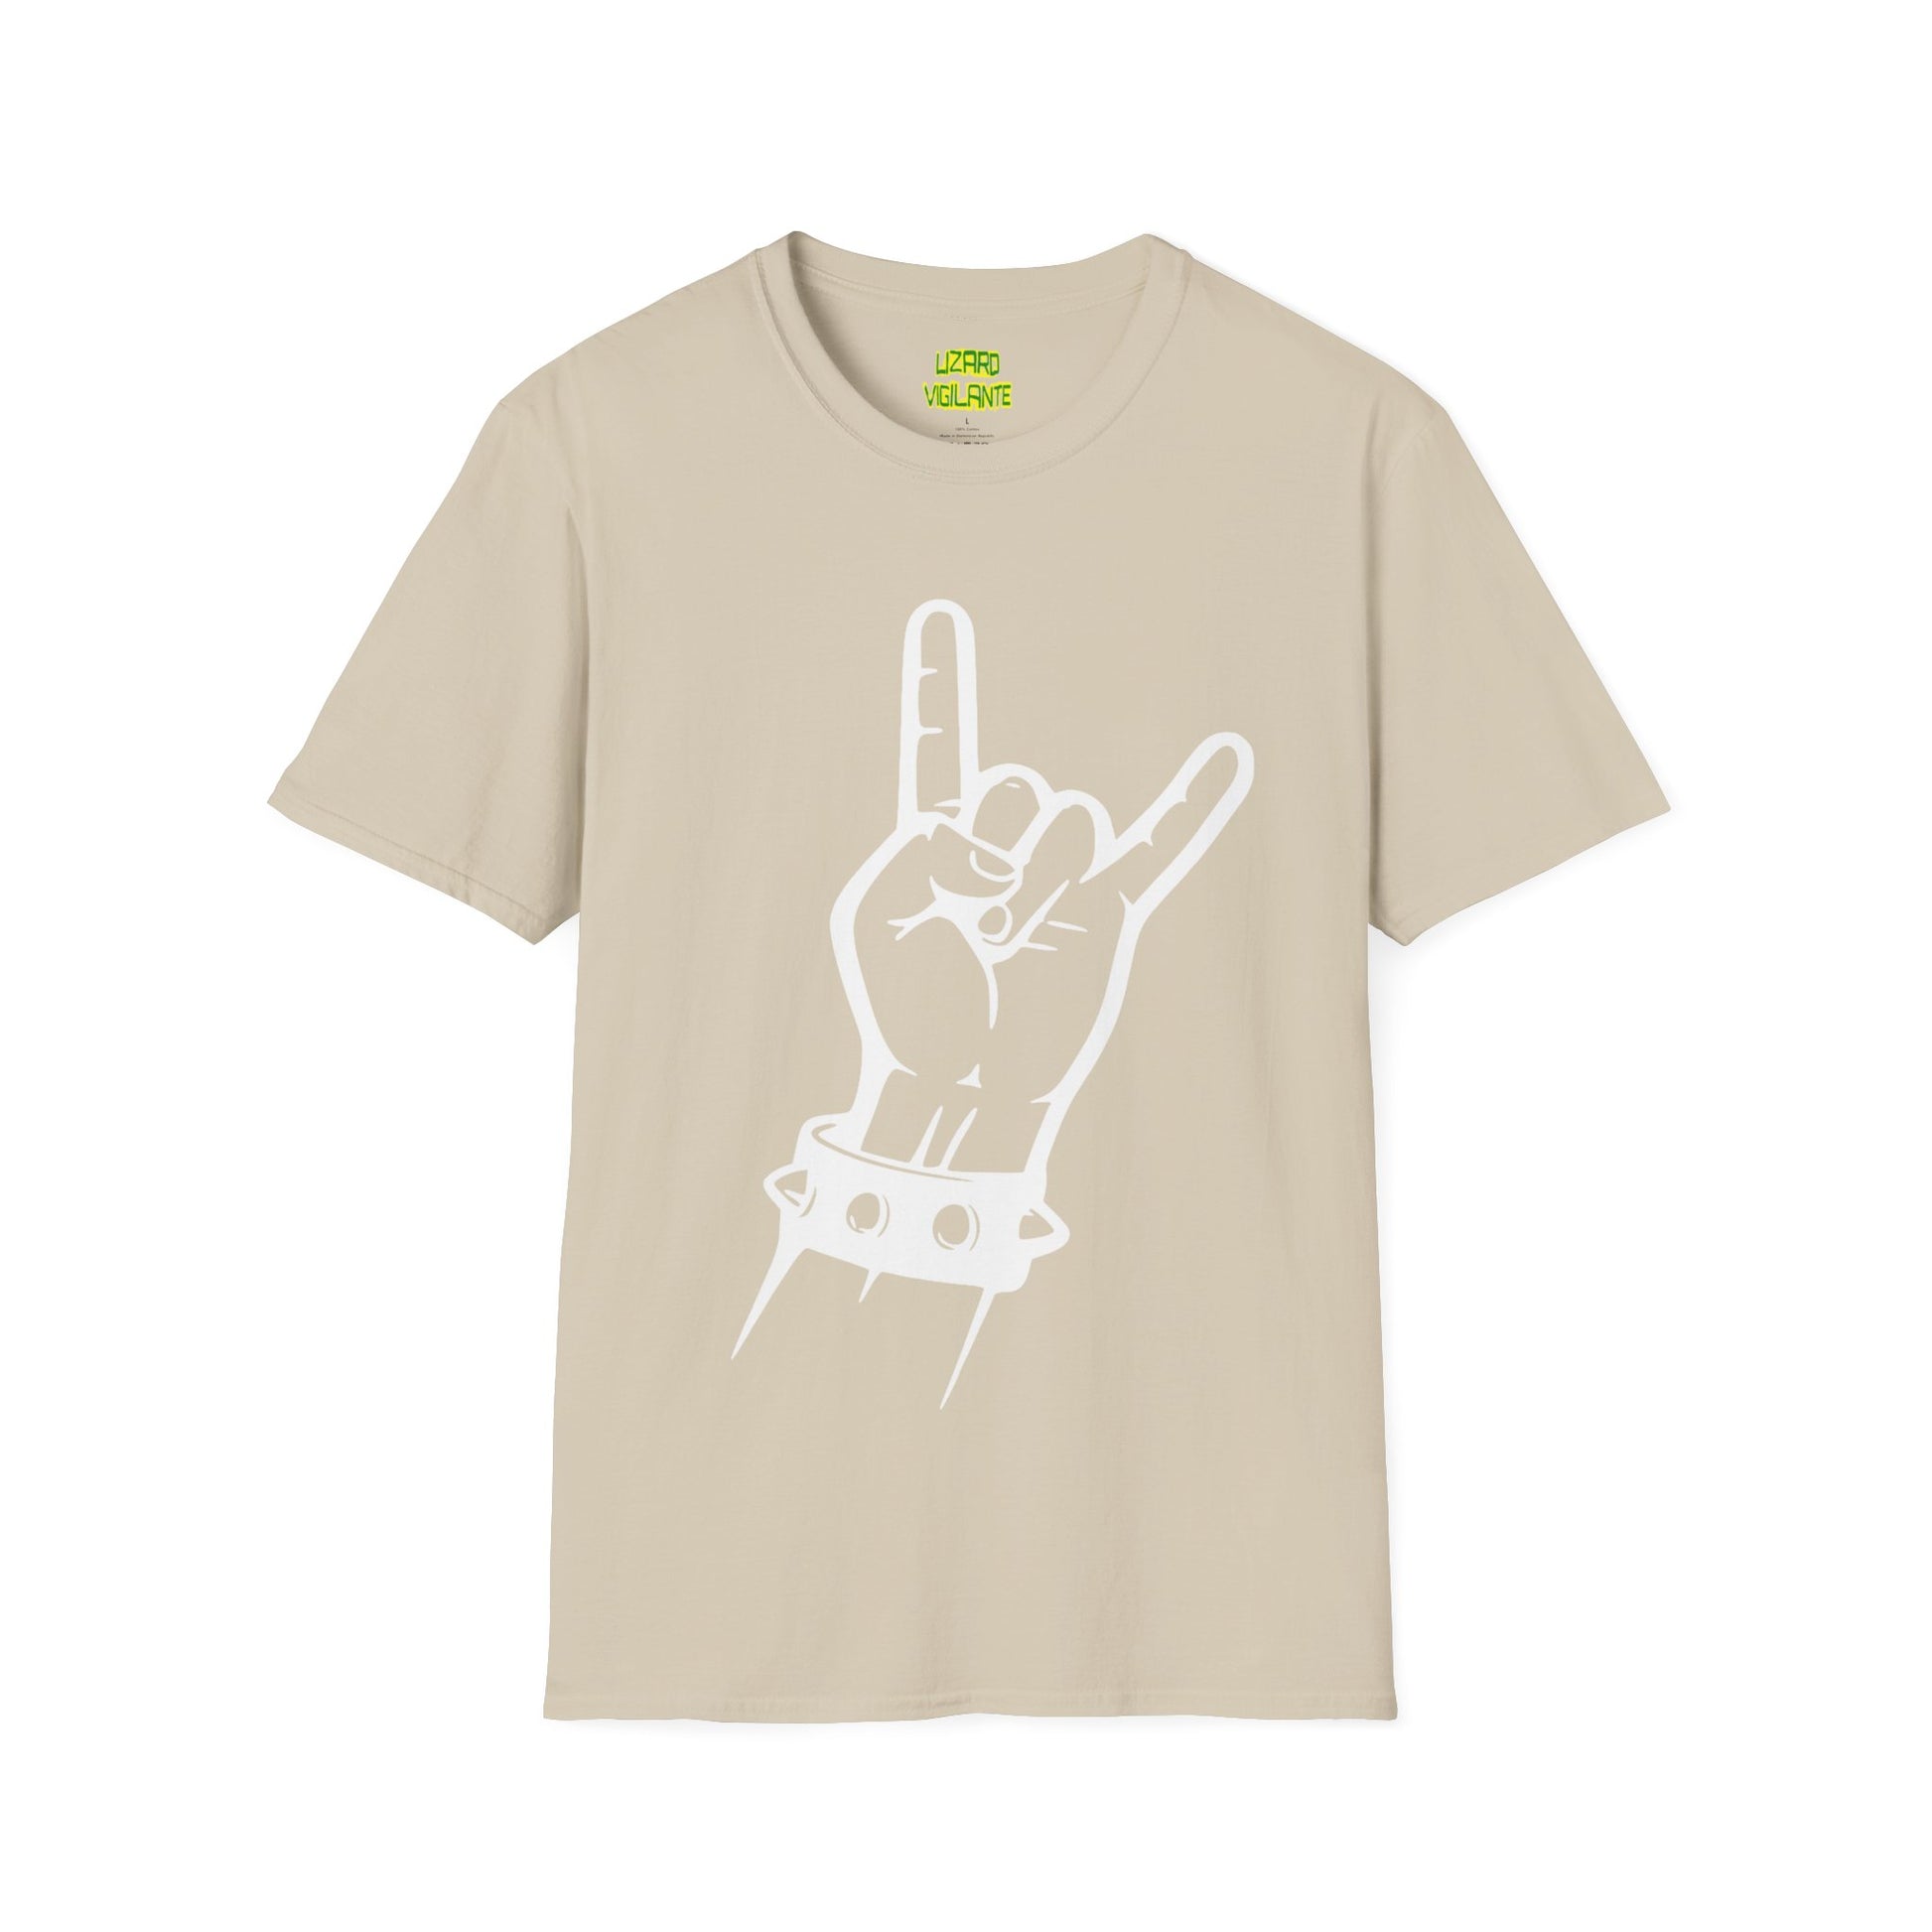 Metal Hand Gesture With Spiked Wristband Unisex Softstyle T-Shirt, White - Lizard Vigilante